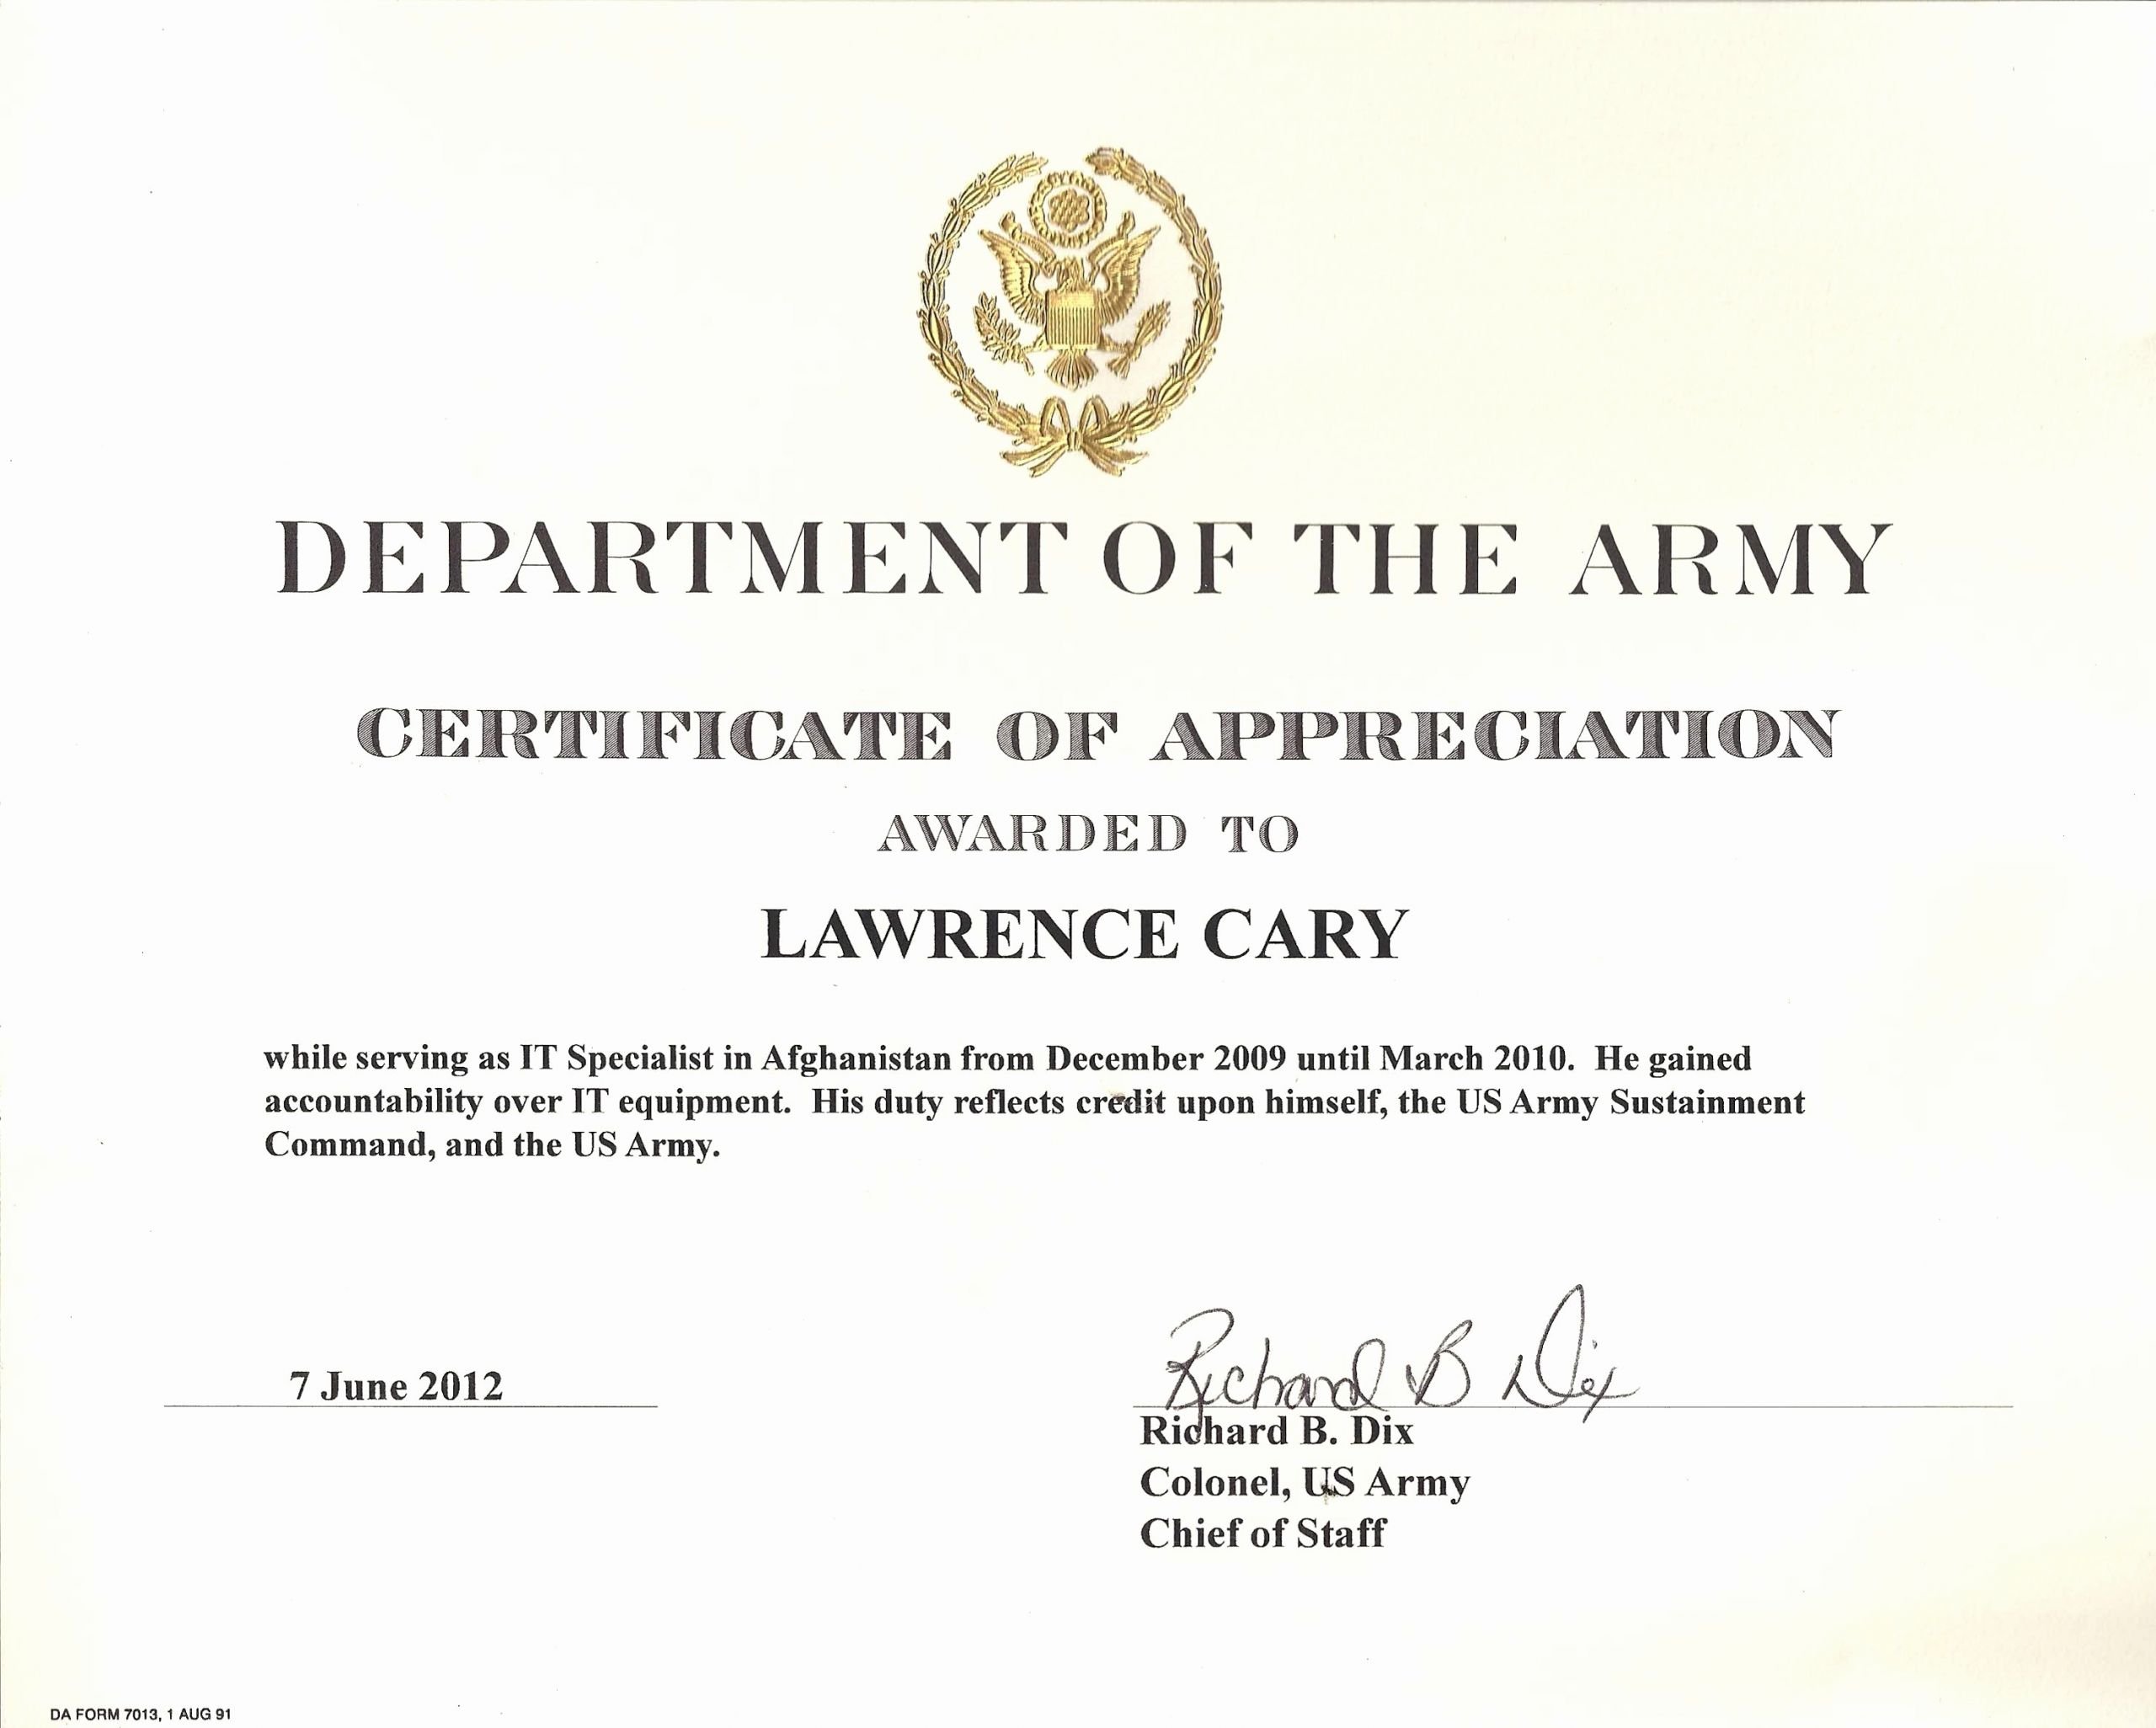 Army Cls Certificate Template Lovely Army Certificate Appreciation form Number Flowersheet